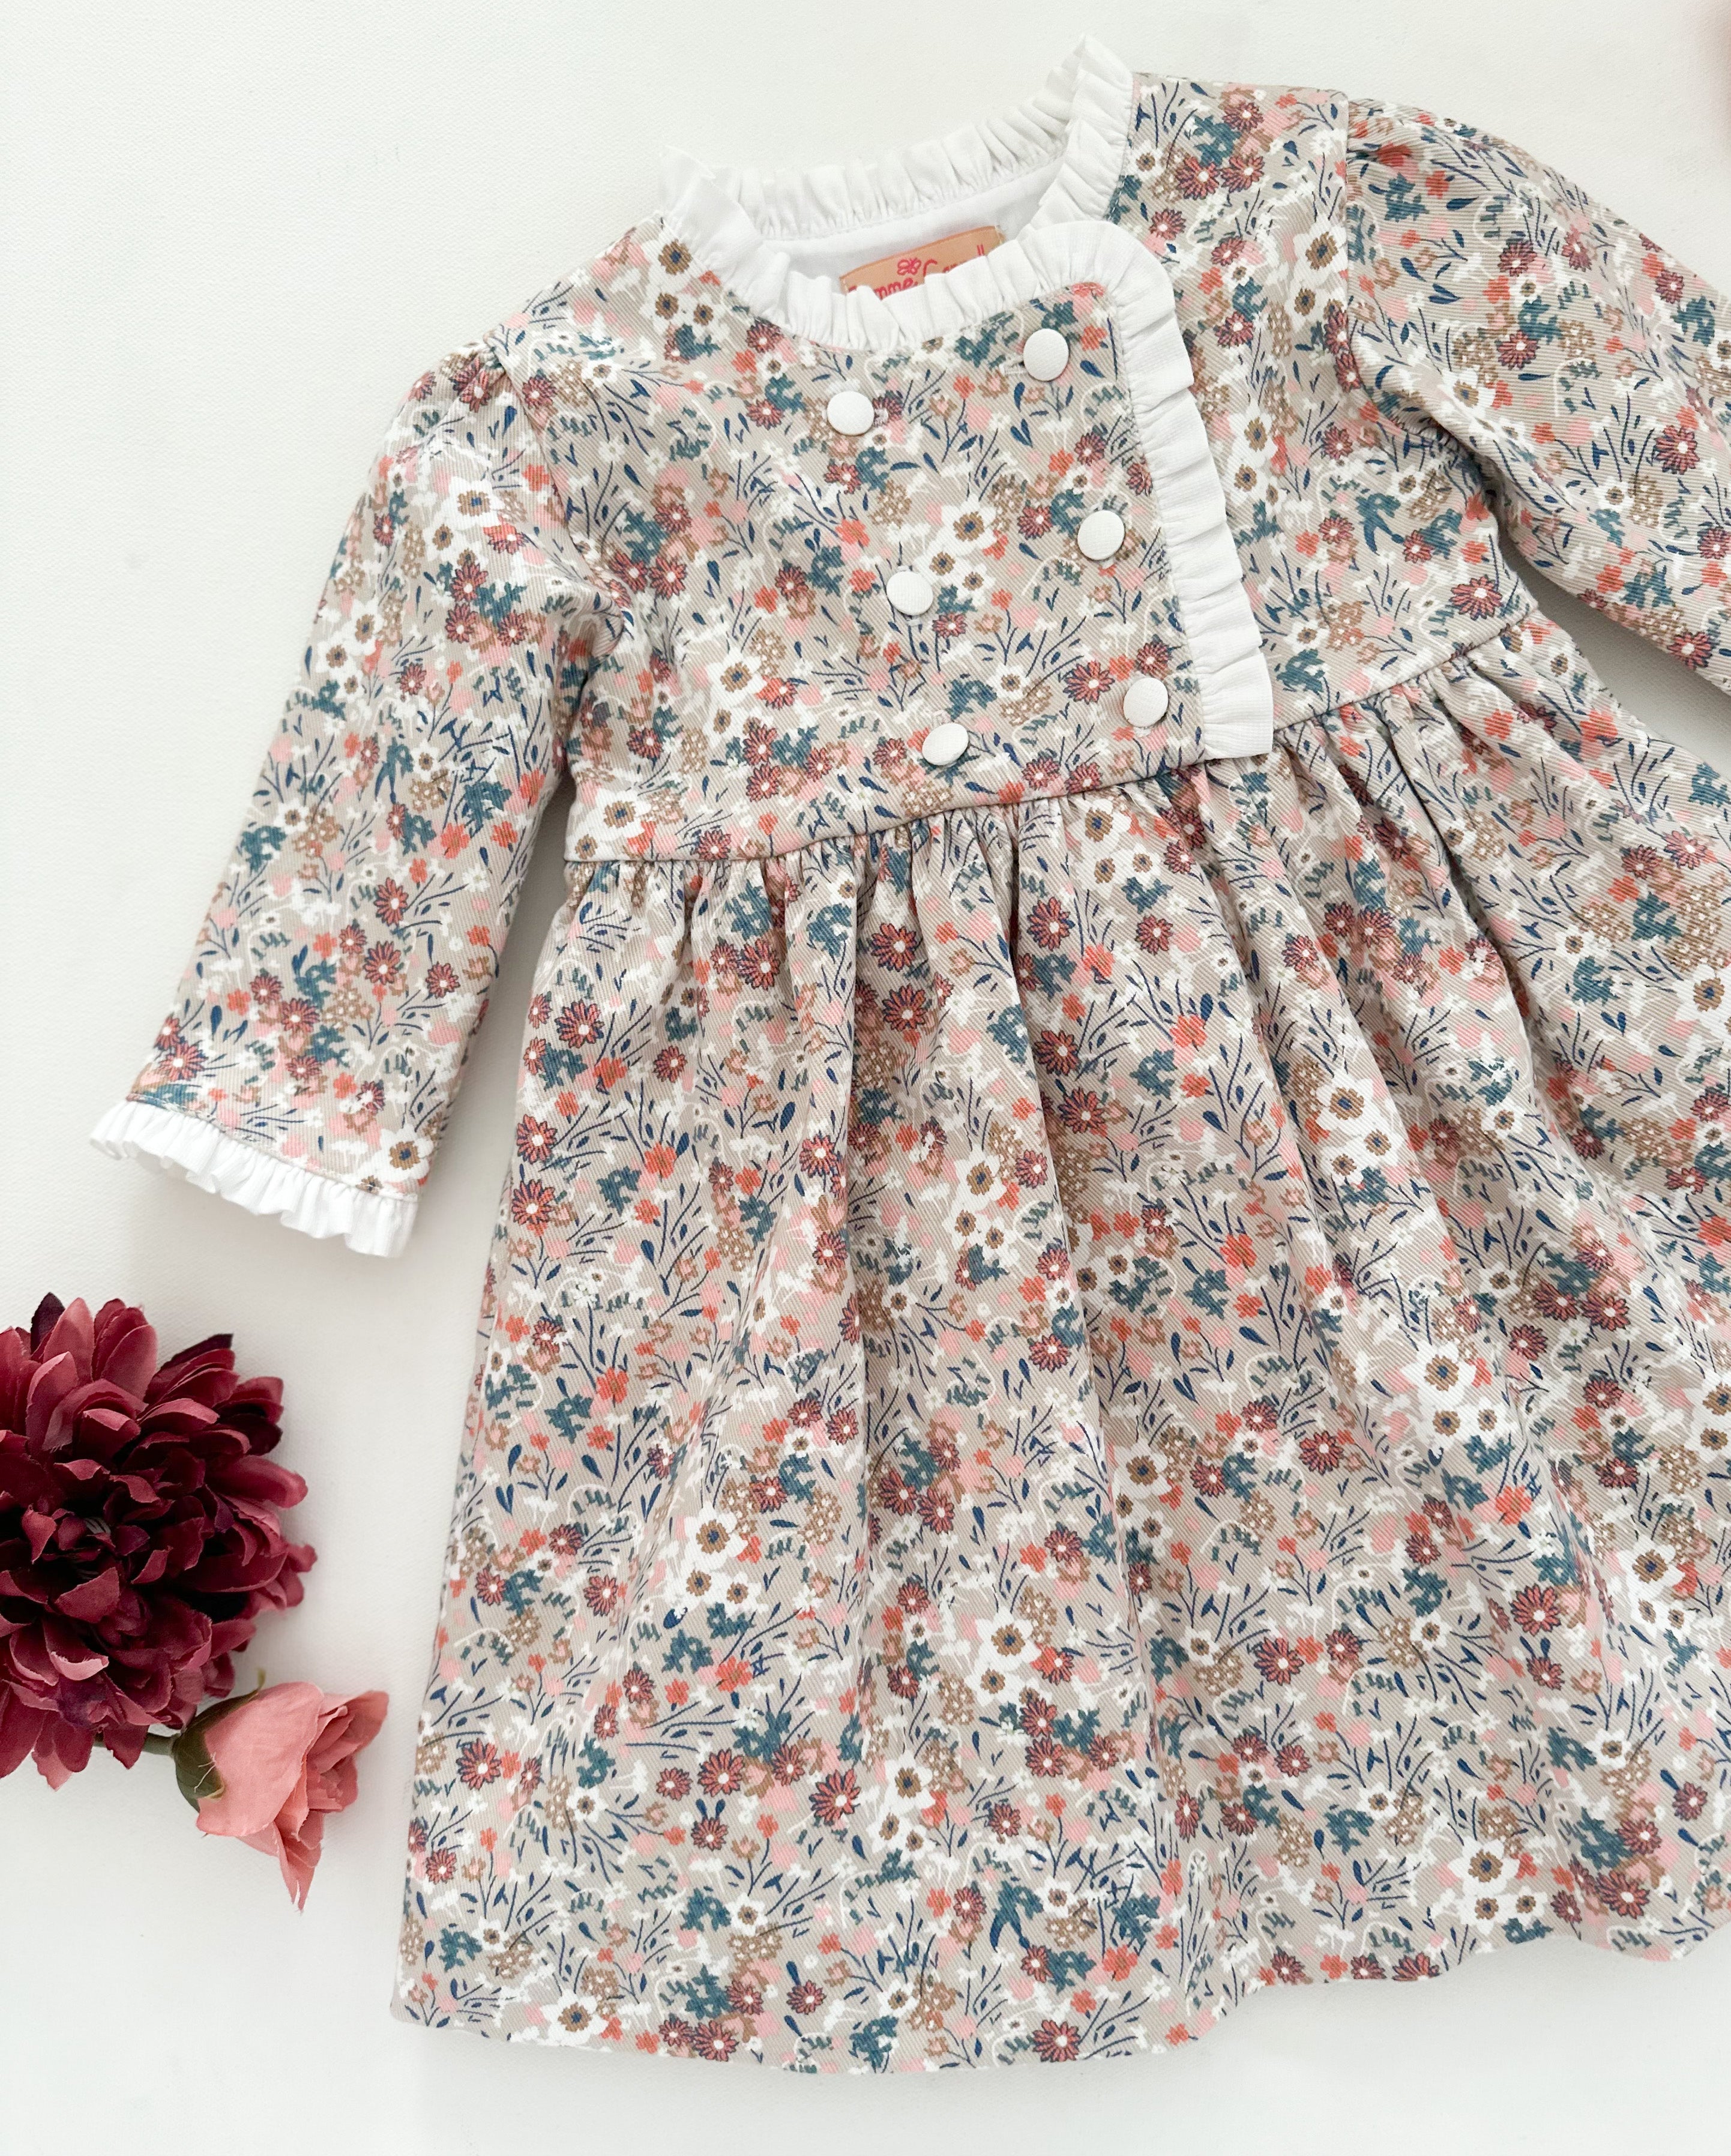 ** SECONDS SALE ** The classic ALINA dress - Floral